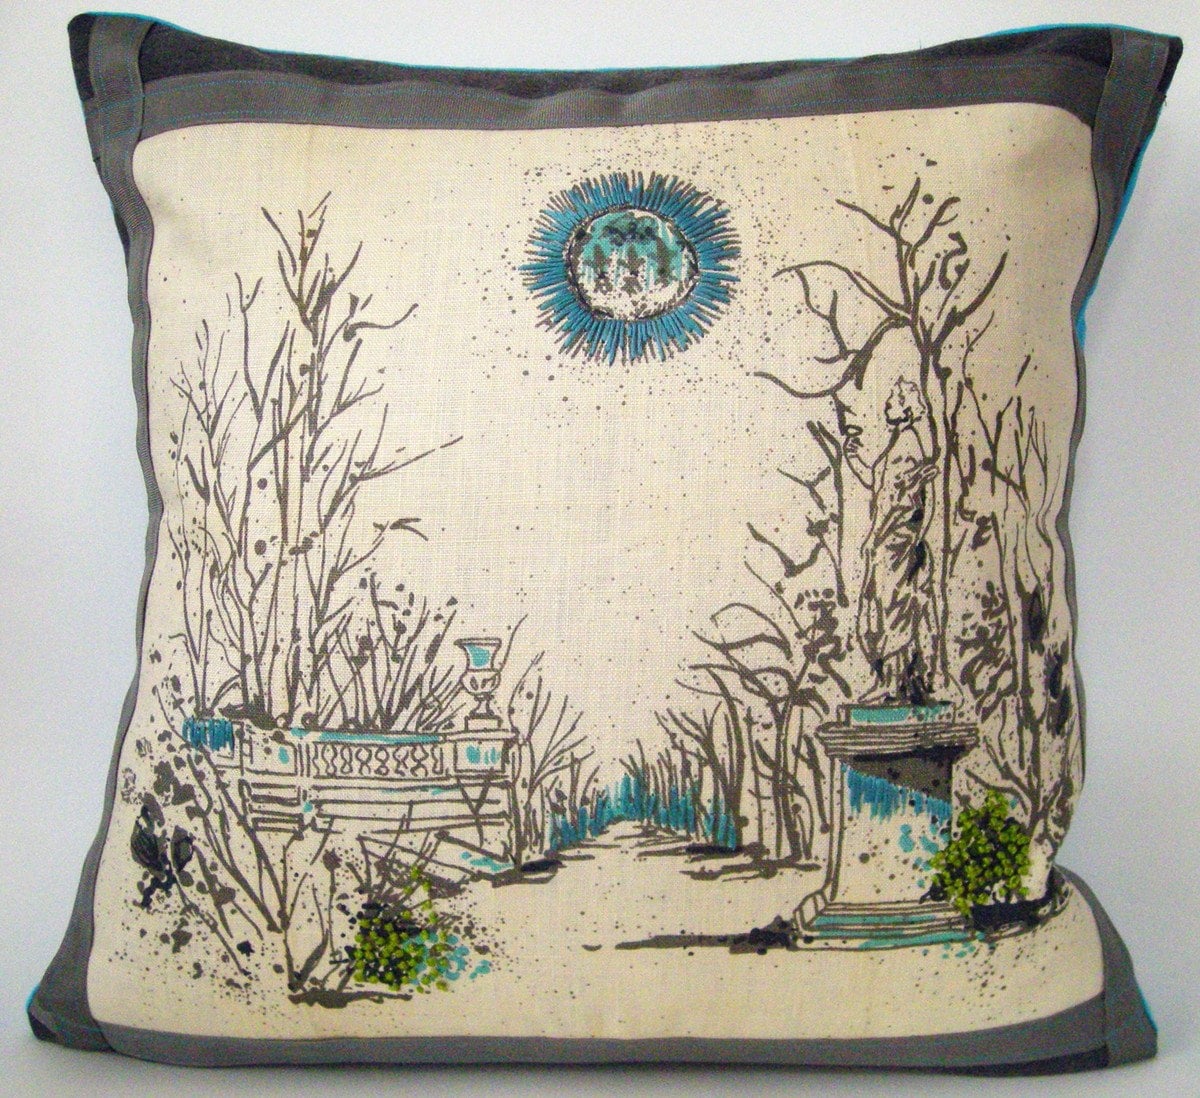 Park Life Embroidered Pillow Cover by CouchDesign on Etsy